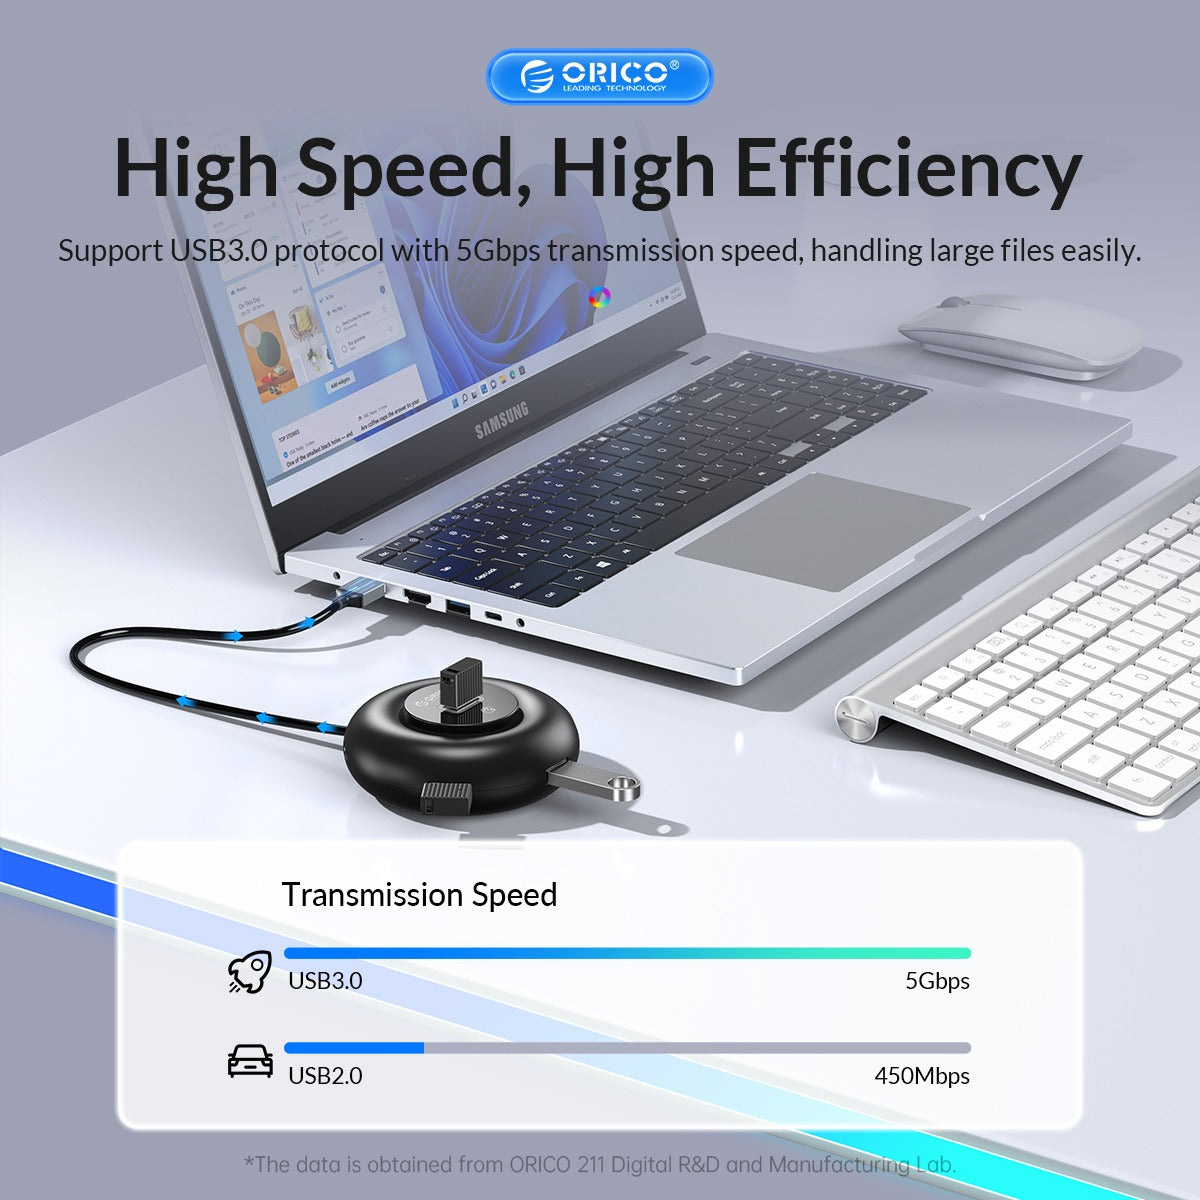 ORICO YX4-C3 (0.3m) 4-Port USB 3.0 Type C Desktop Hub 10W with 5Gbps Transmission Rate, 5Gbps USB-A 3.0 Output, 3.5mm Audio Port for Windows 8/10, macOS, Linux, PC, Laptop, Desktop Computer